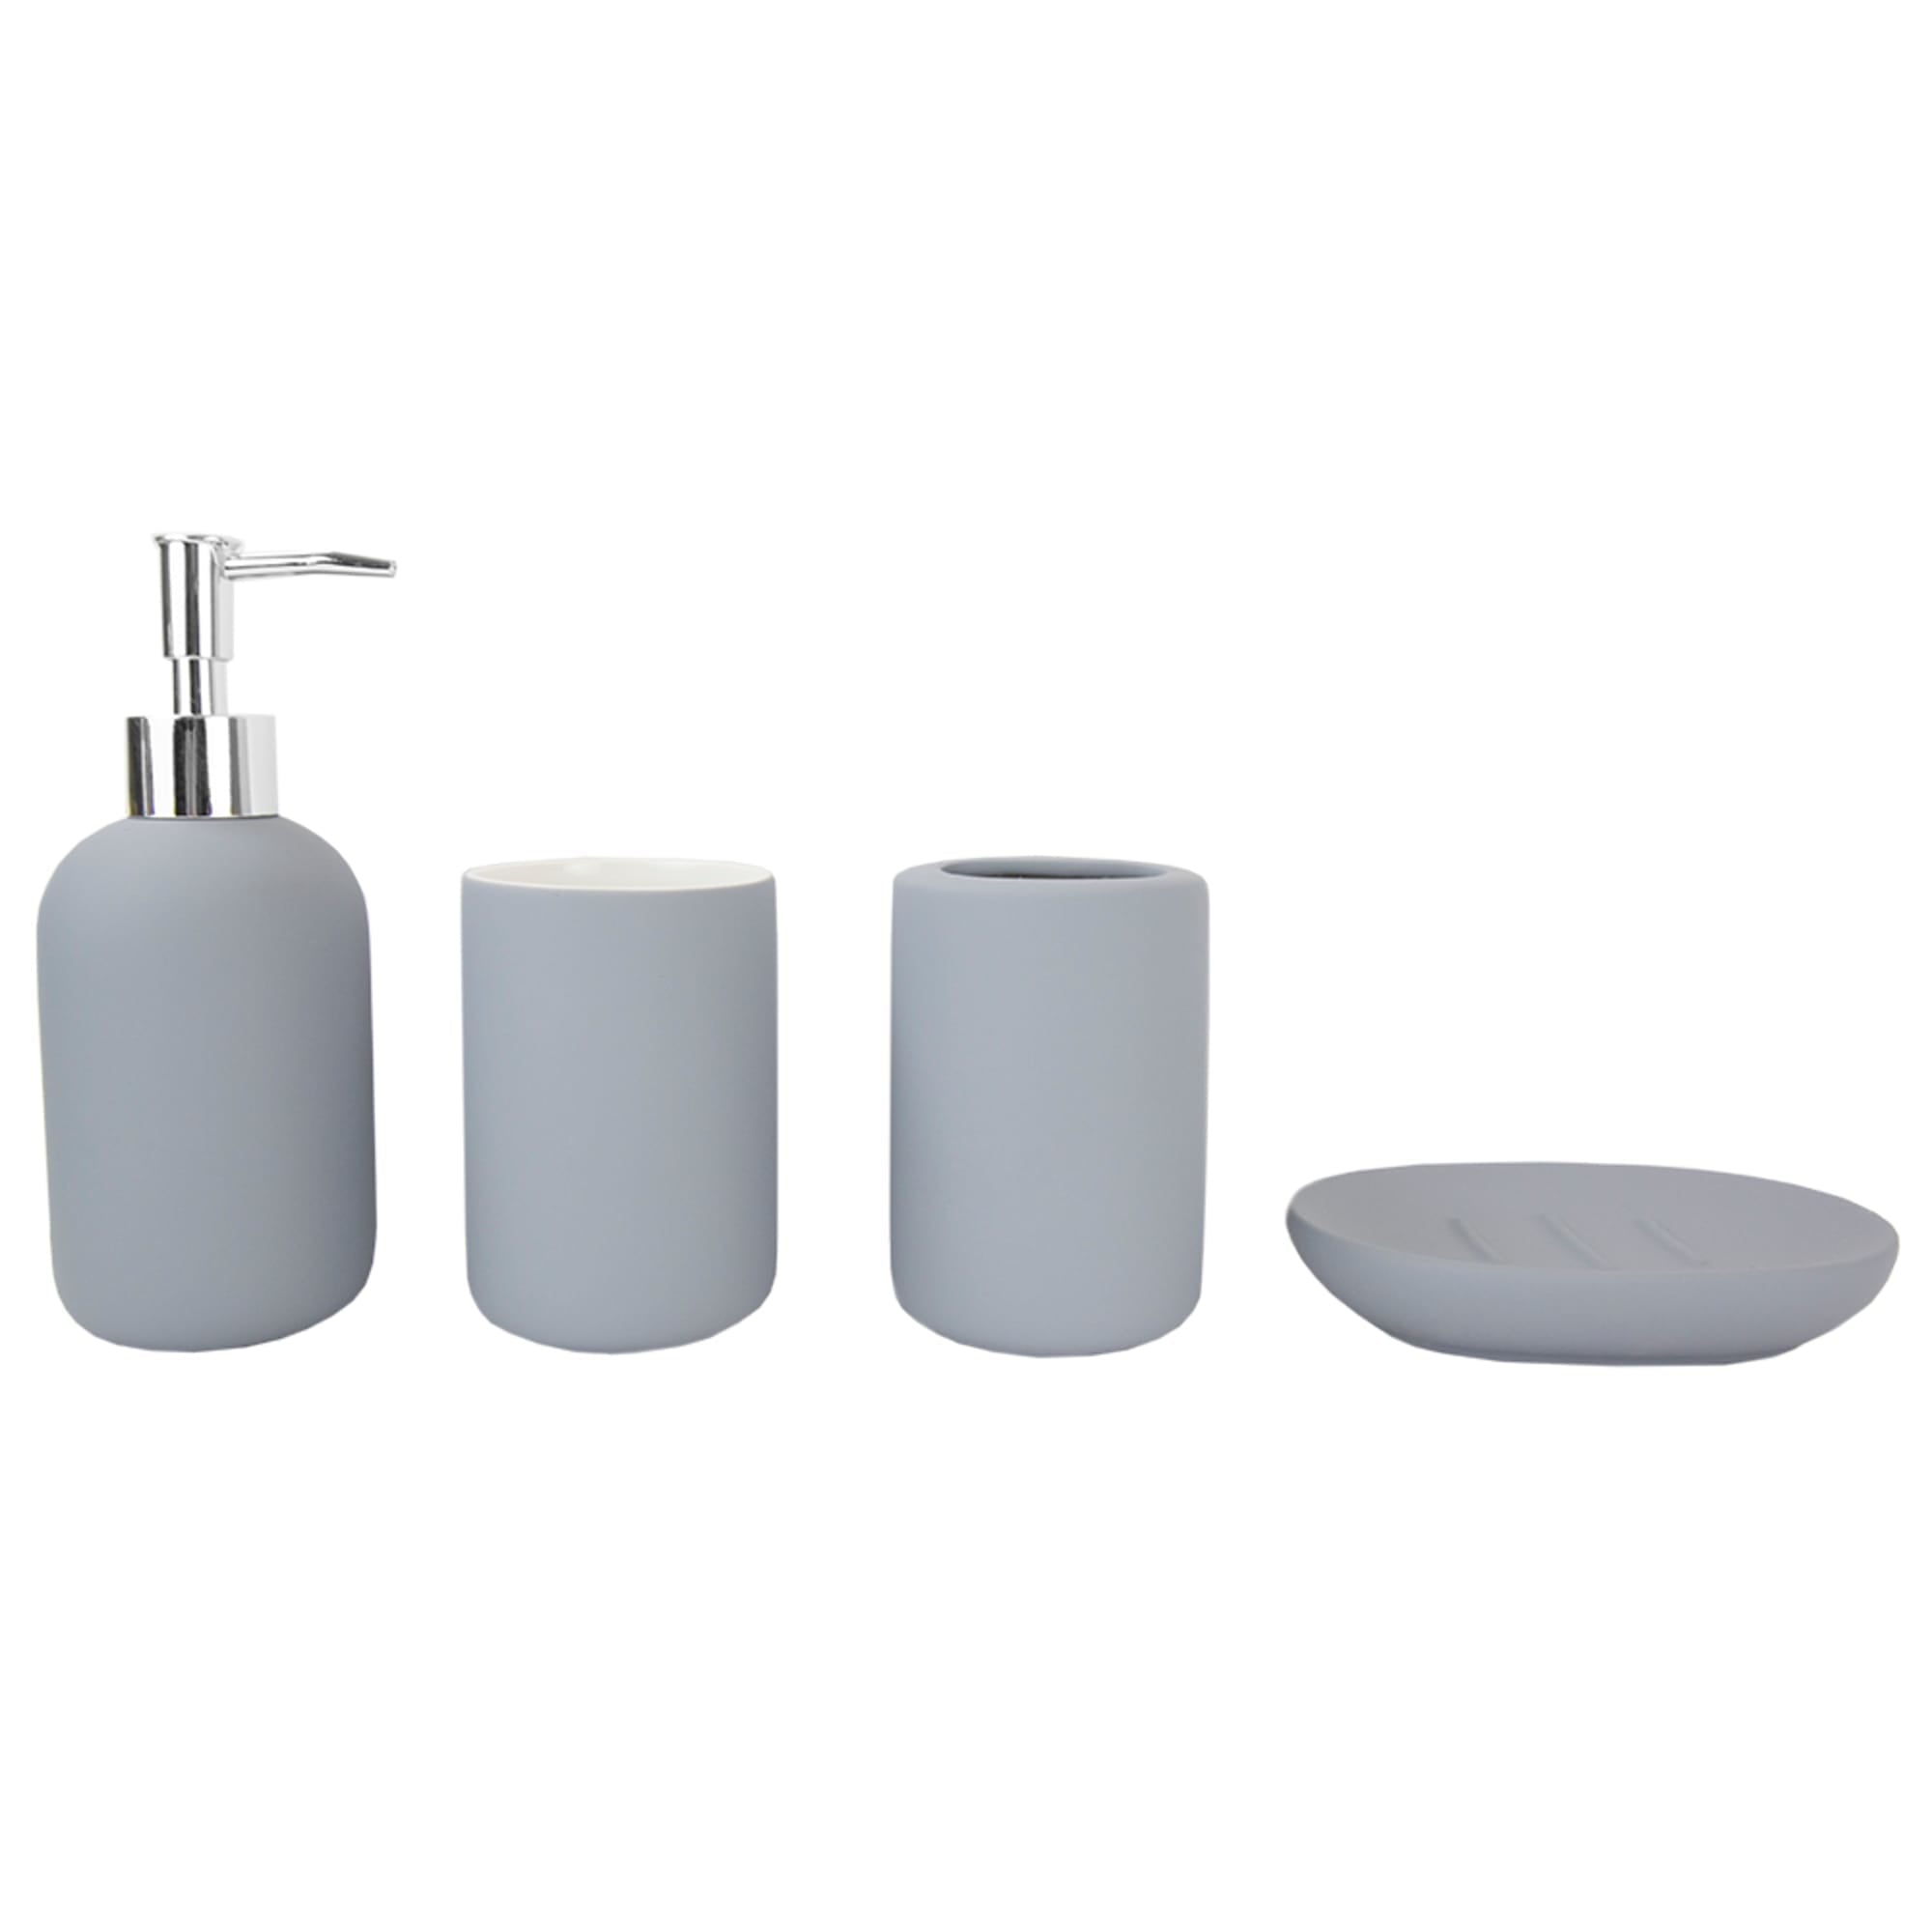 Home Basic 4 Piece Rubberized Ceramic Bath Accessory Set, Grey $10.00 EACH, CASE PACK OF 6